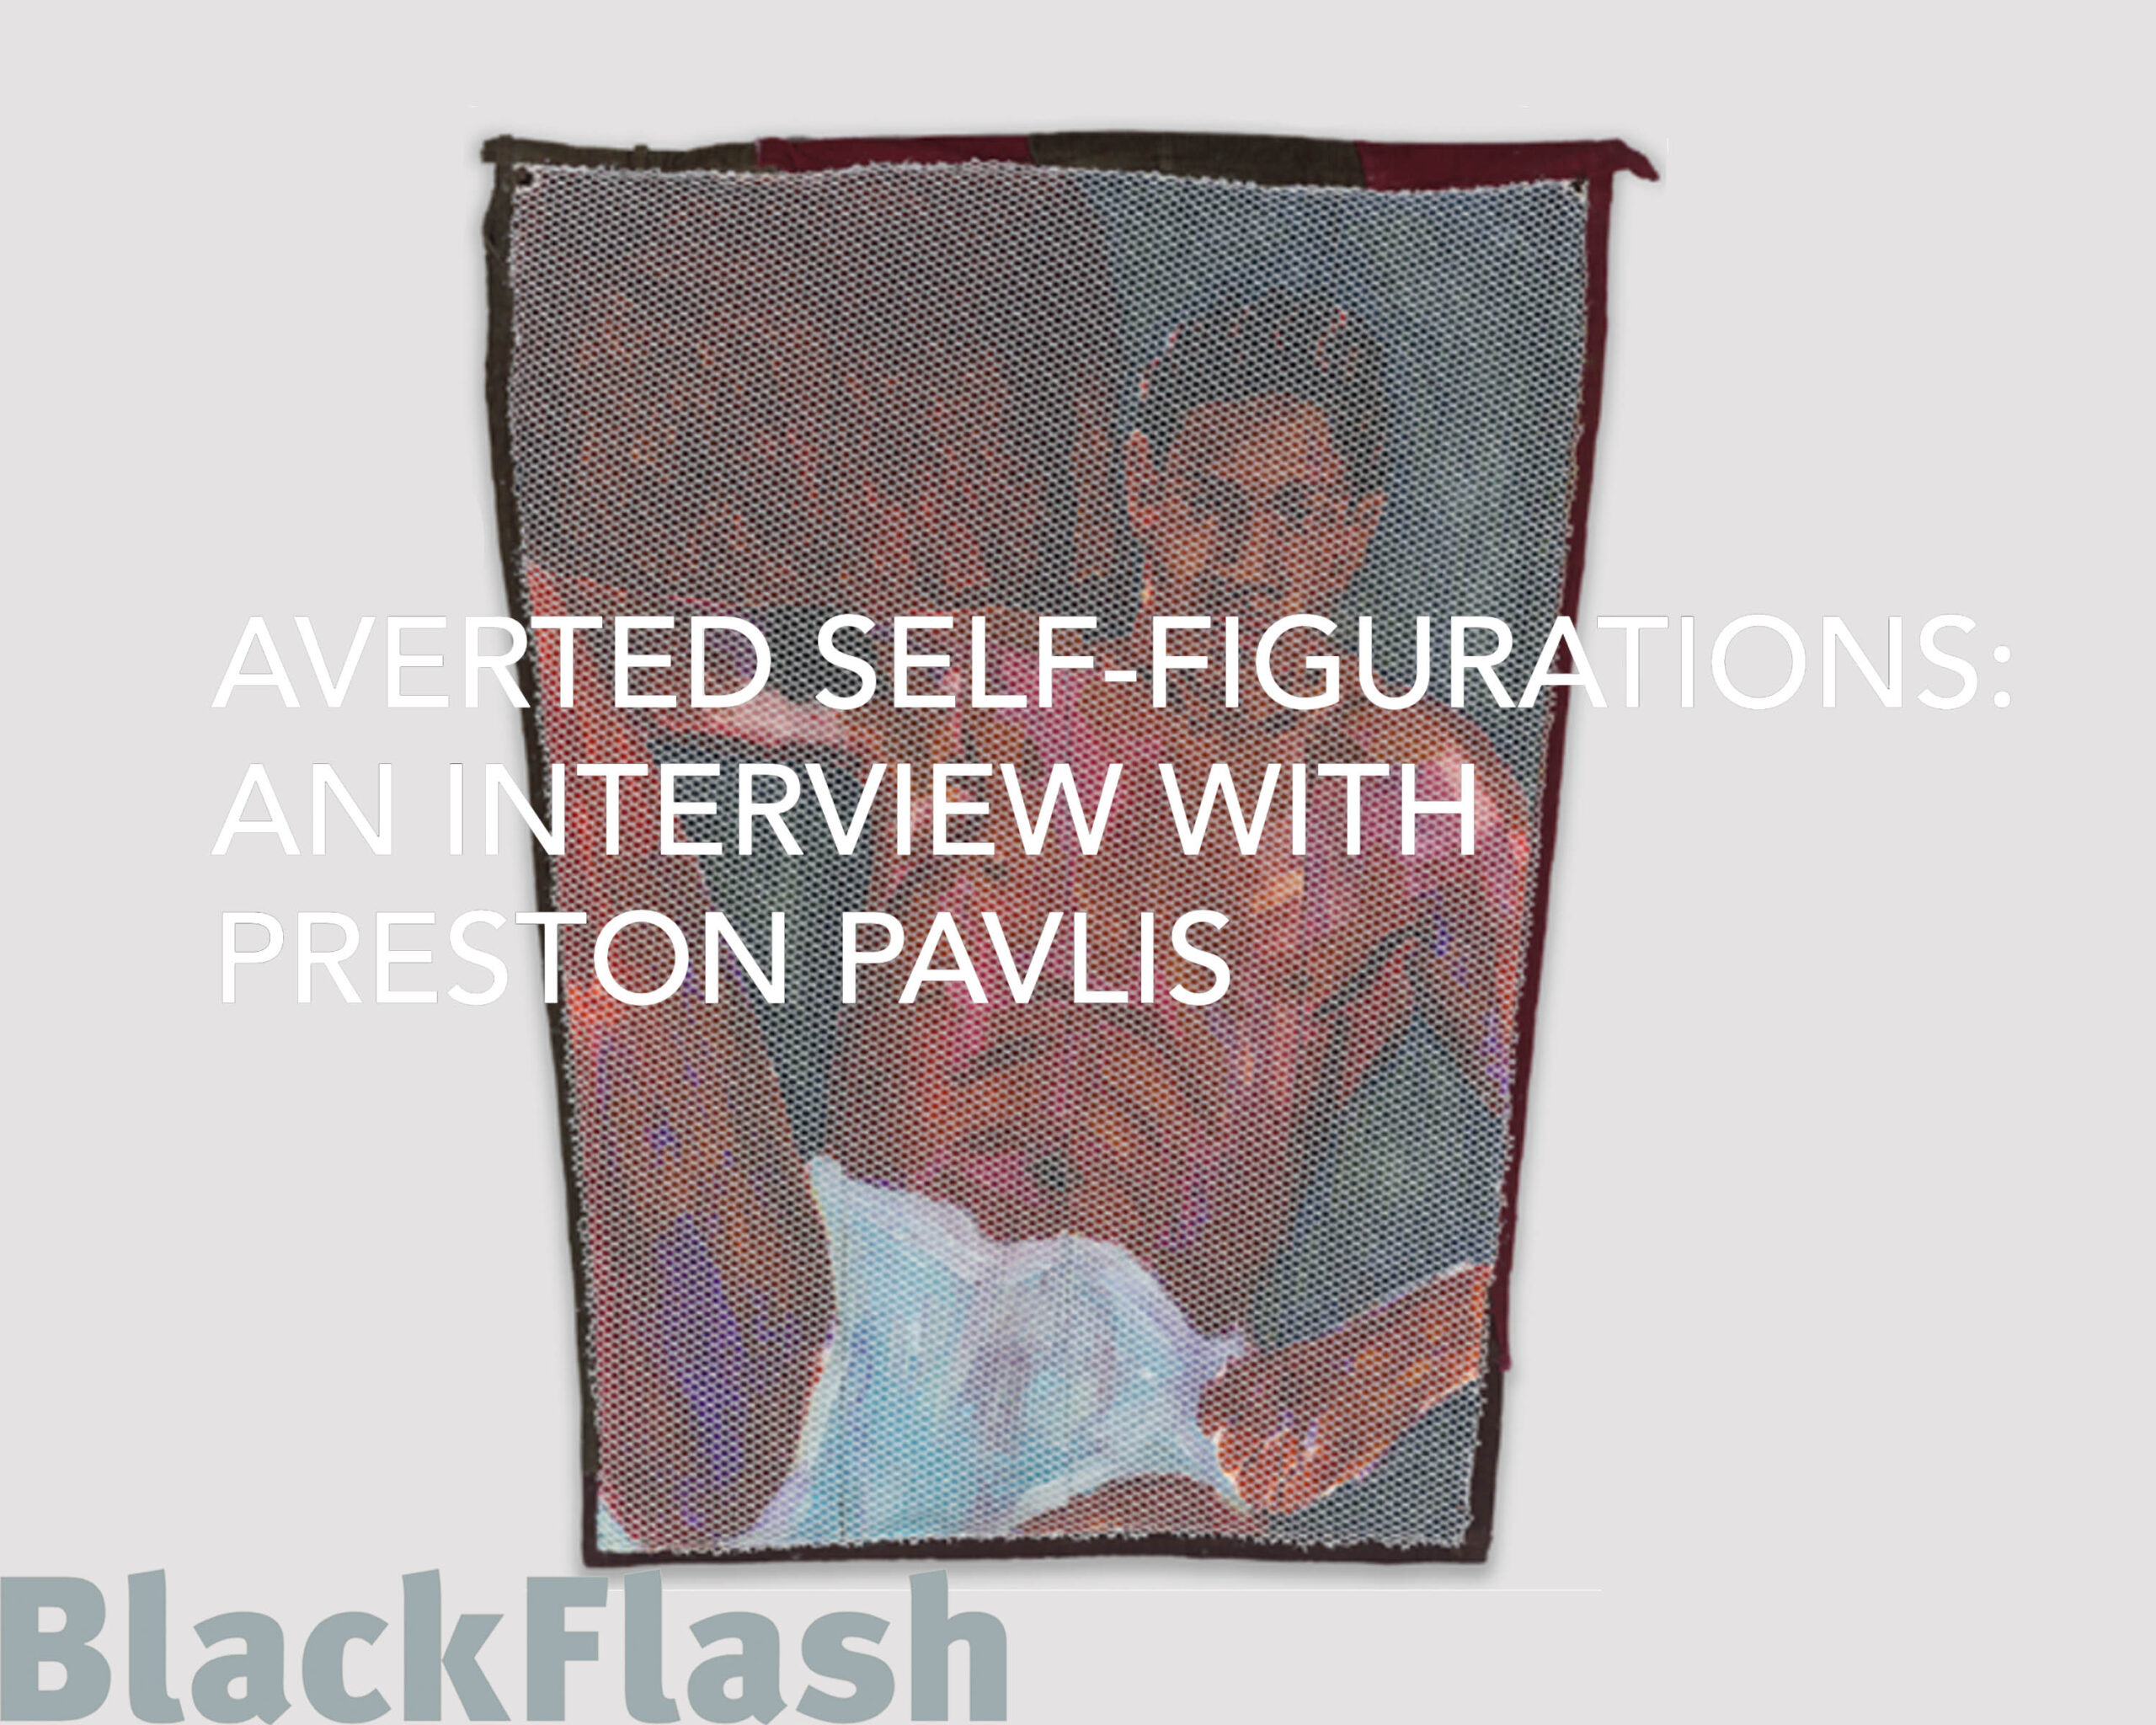 BlackFlash, 2022 | Averted Self-Figurations: An Interview with Preston Pavlis